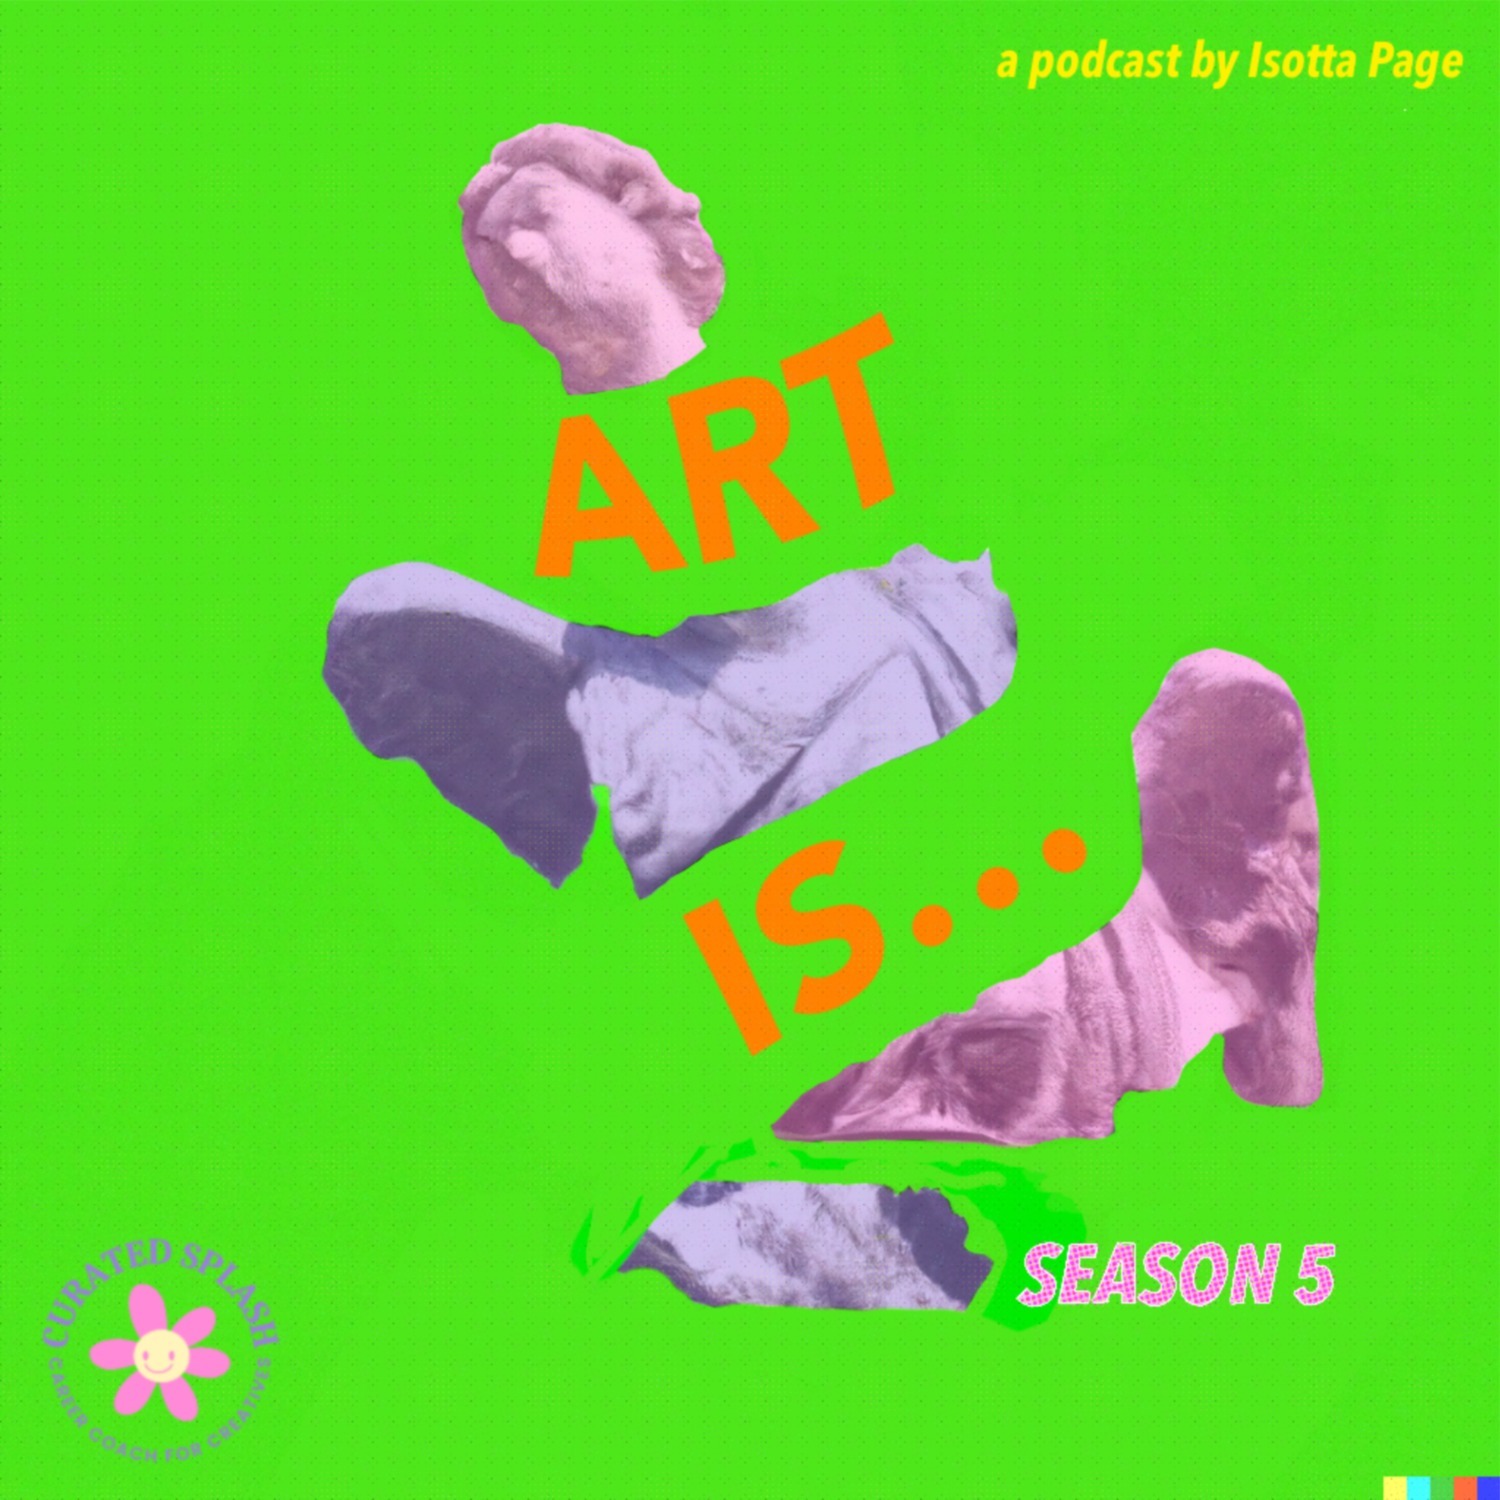 8 Album Covers And What They'd Look Like If Virgil Abloh Designed